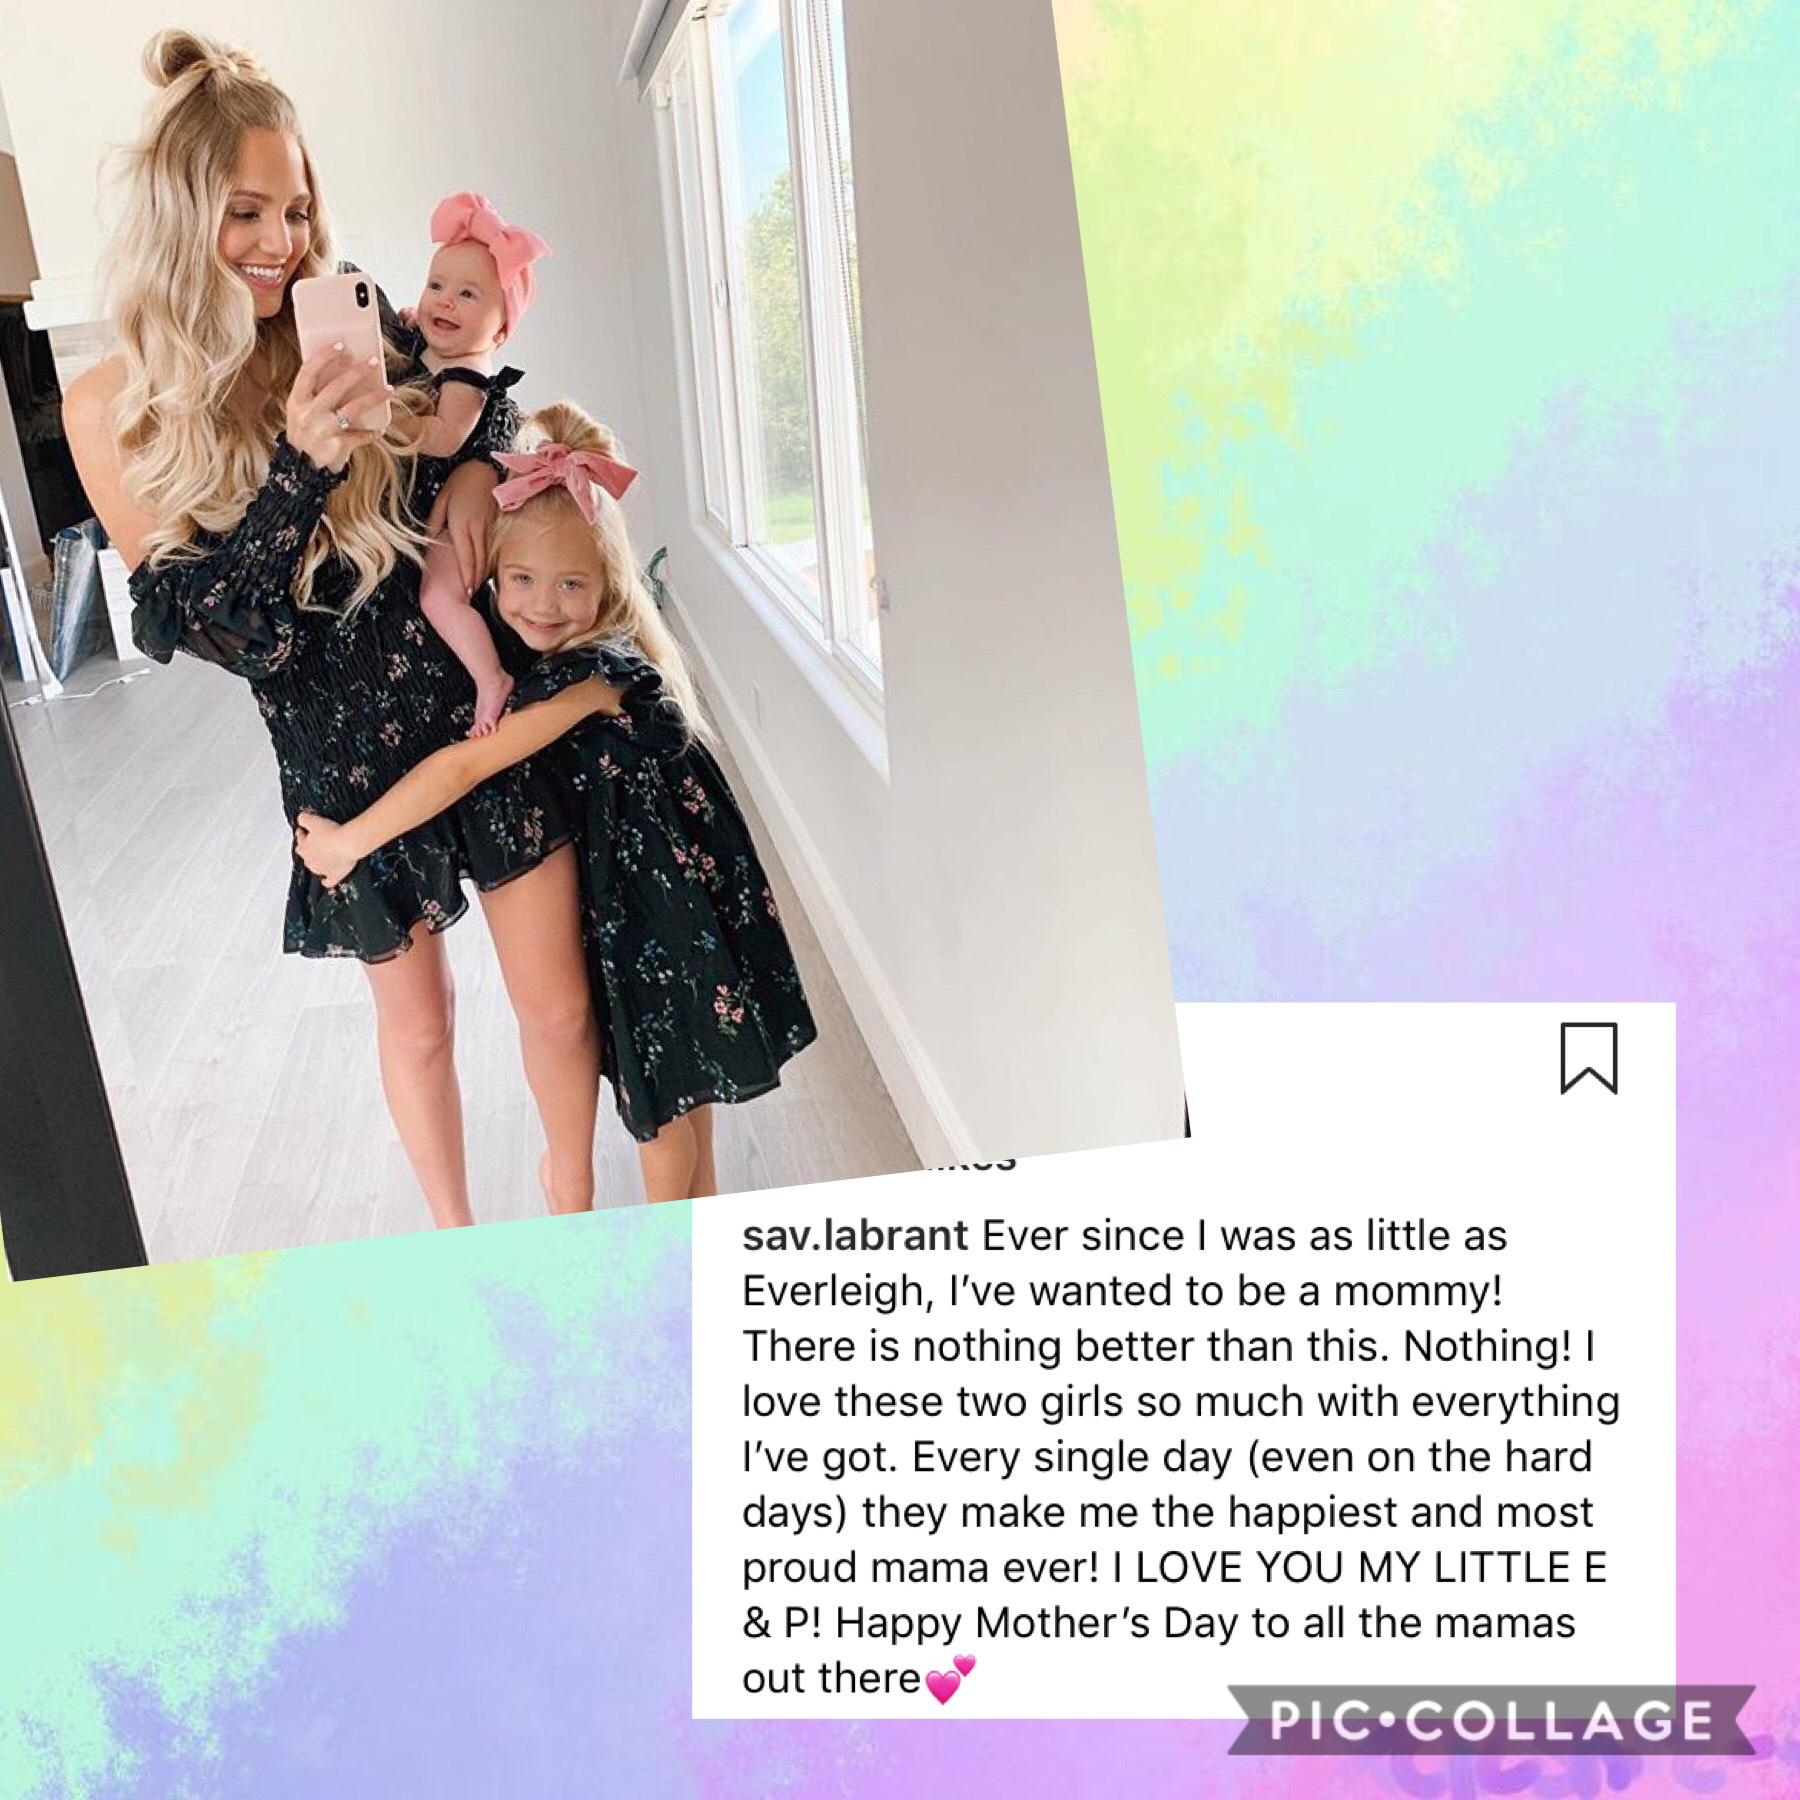 Can we just take a moment to appreciate how much Savannah lives life! I mean look what she said on this post. She is the most amazing mother and is so connected to God!!😚🤞🏼💫